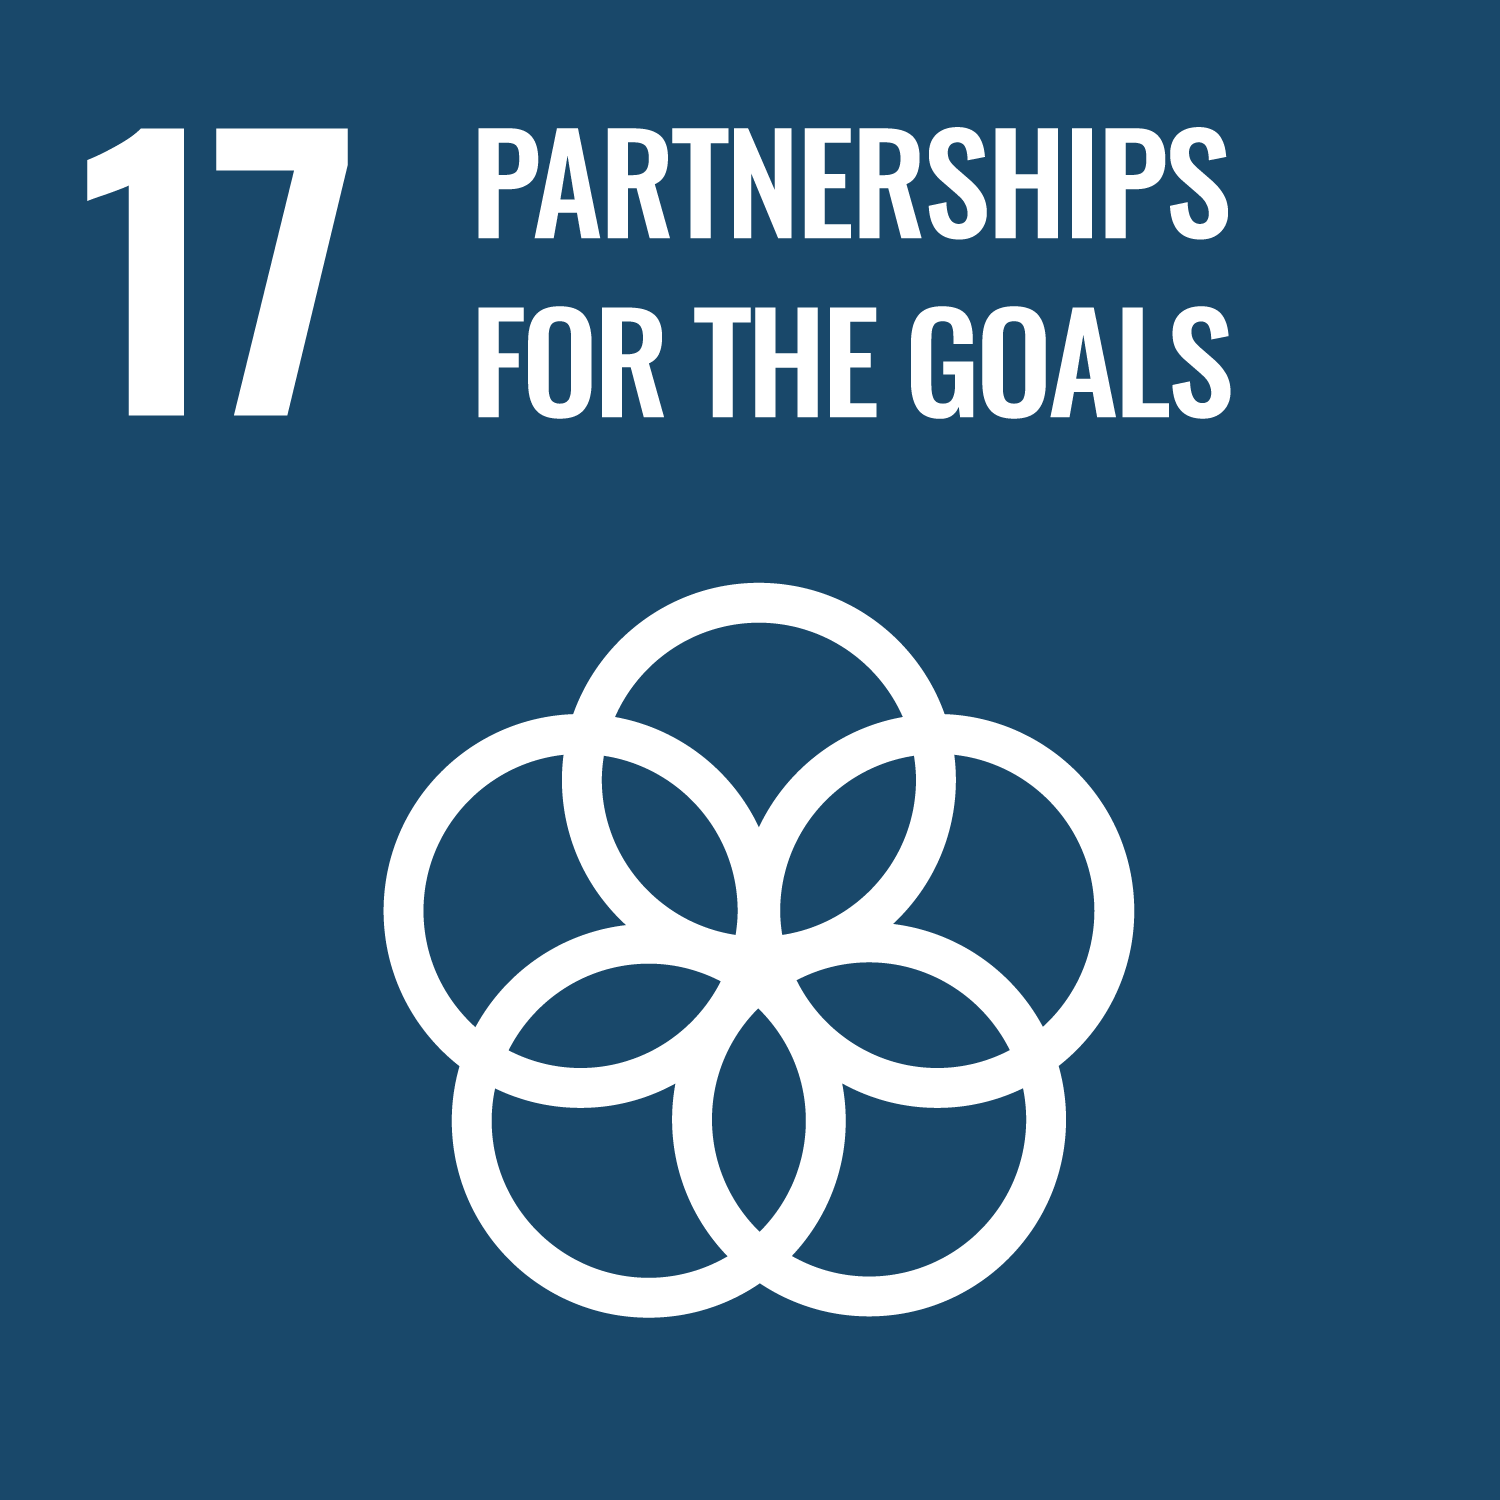 SDG Graphic Partnership for the Goals